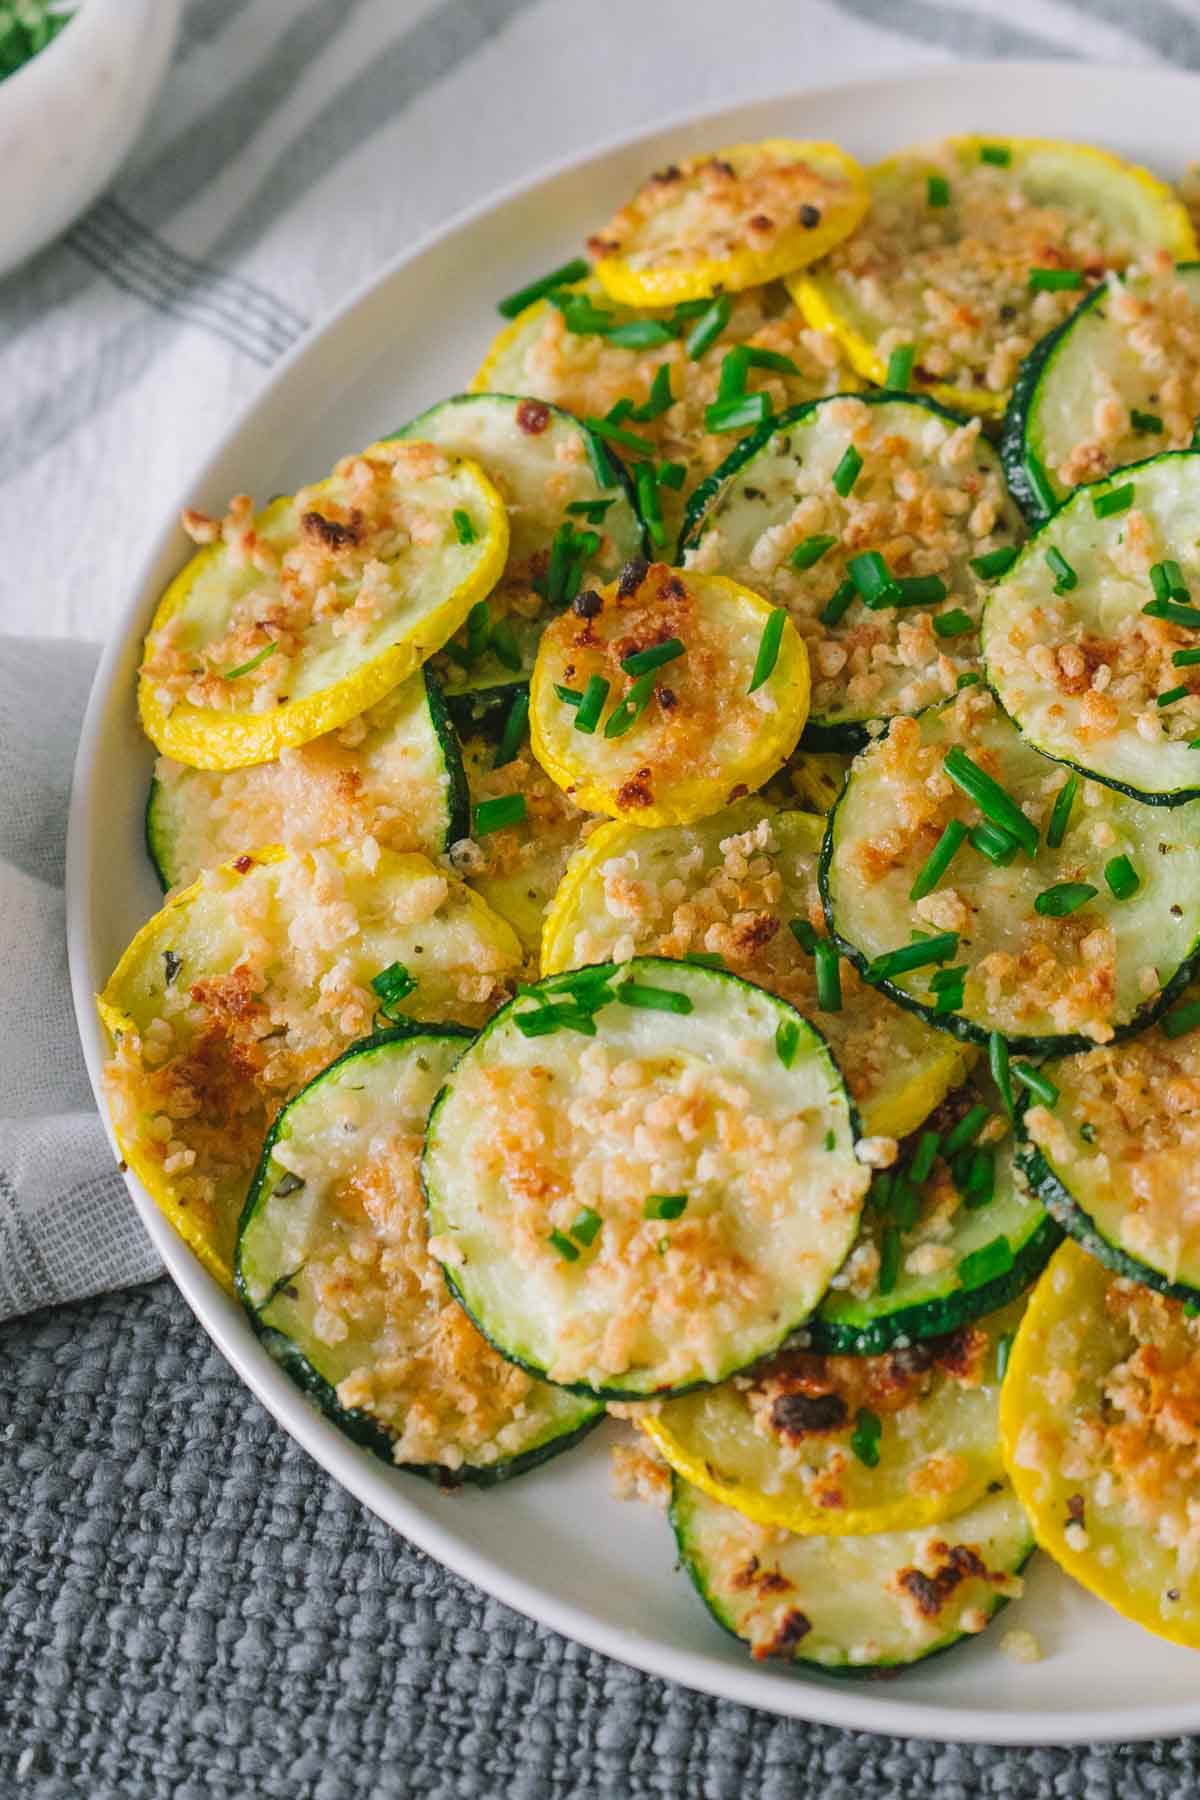 up close of roasted zucchini and squash slices topped with crispy parmesan cheese.